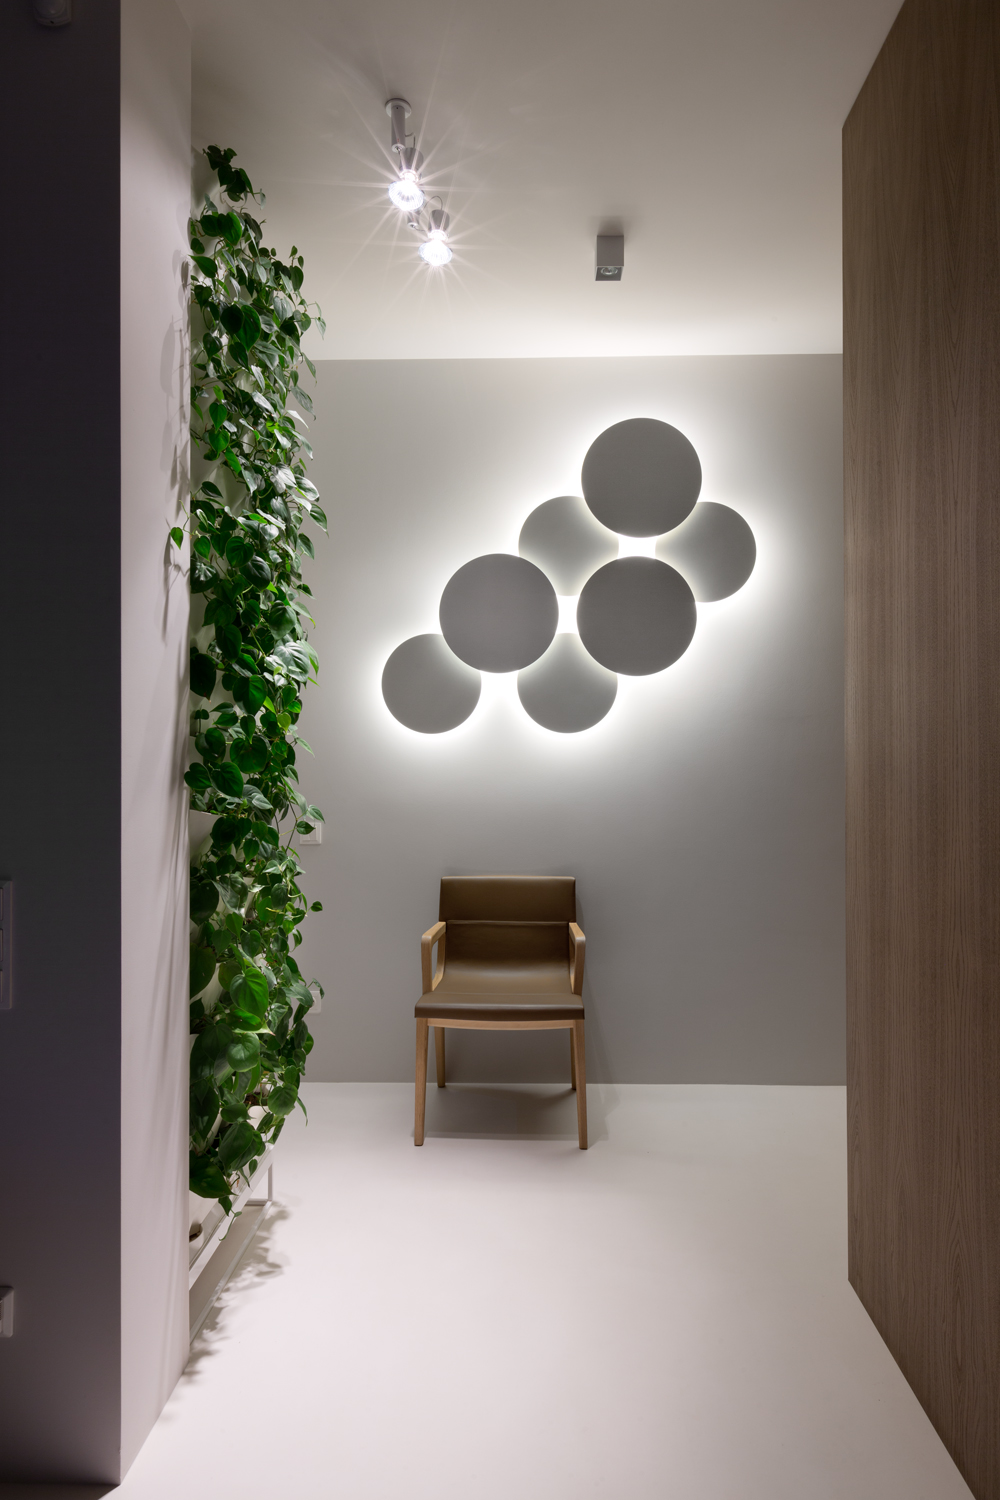 These 26 Brilliant LED Wall Mounted Lights Are a Work of Art